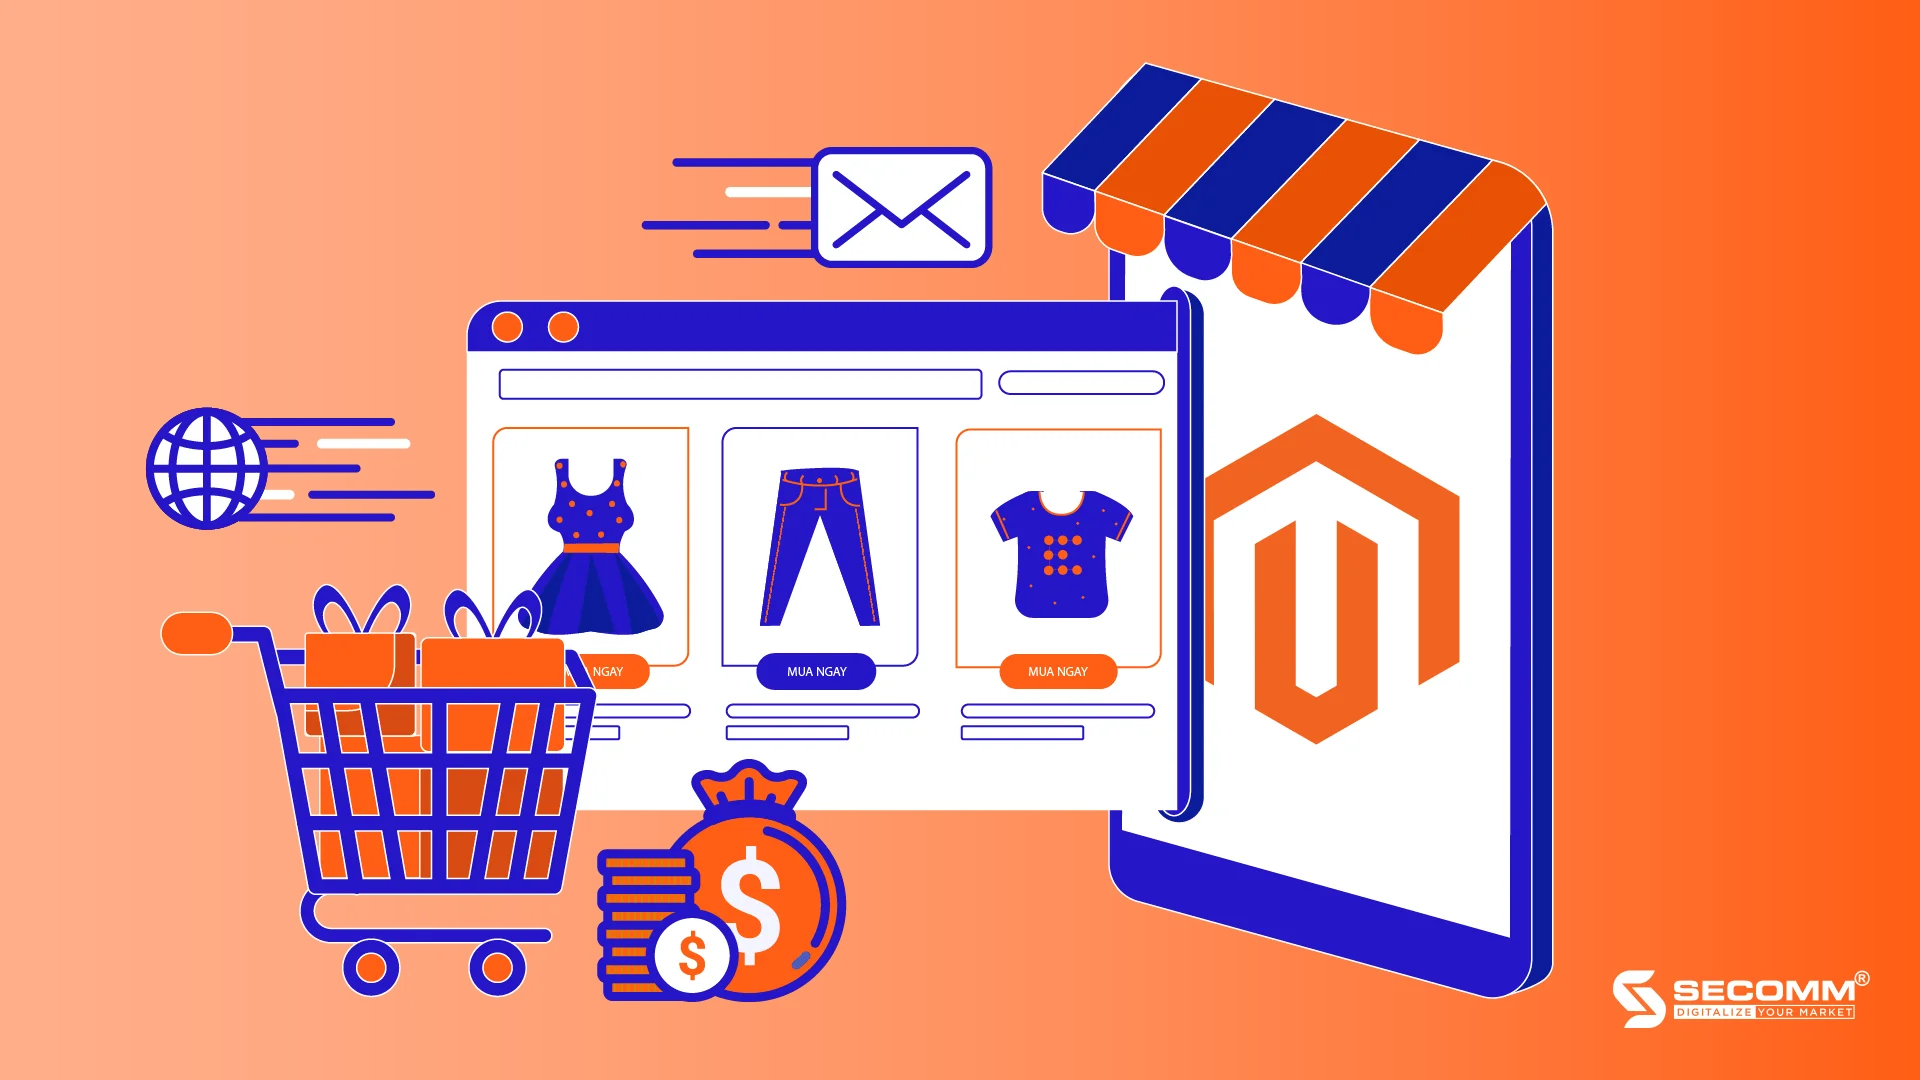 Magento - The ultimate ecommerce platform for business